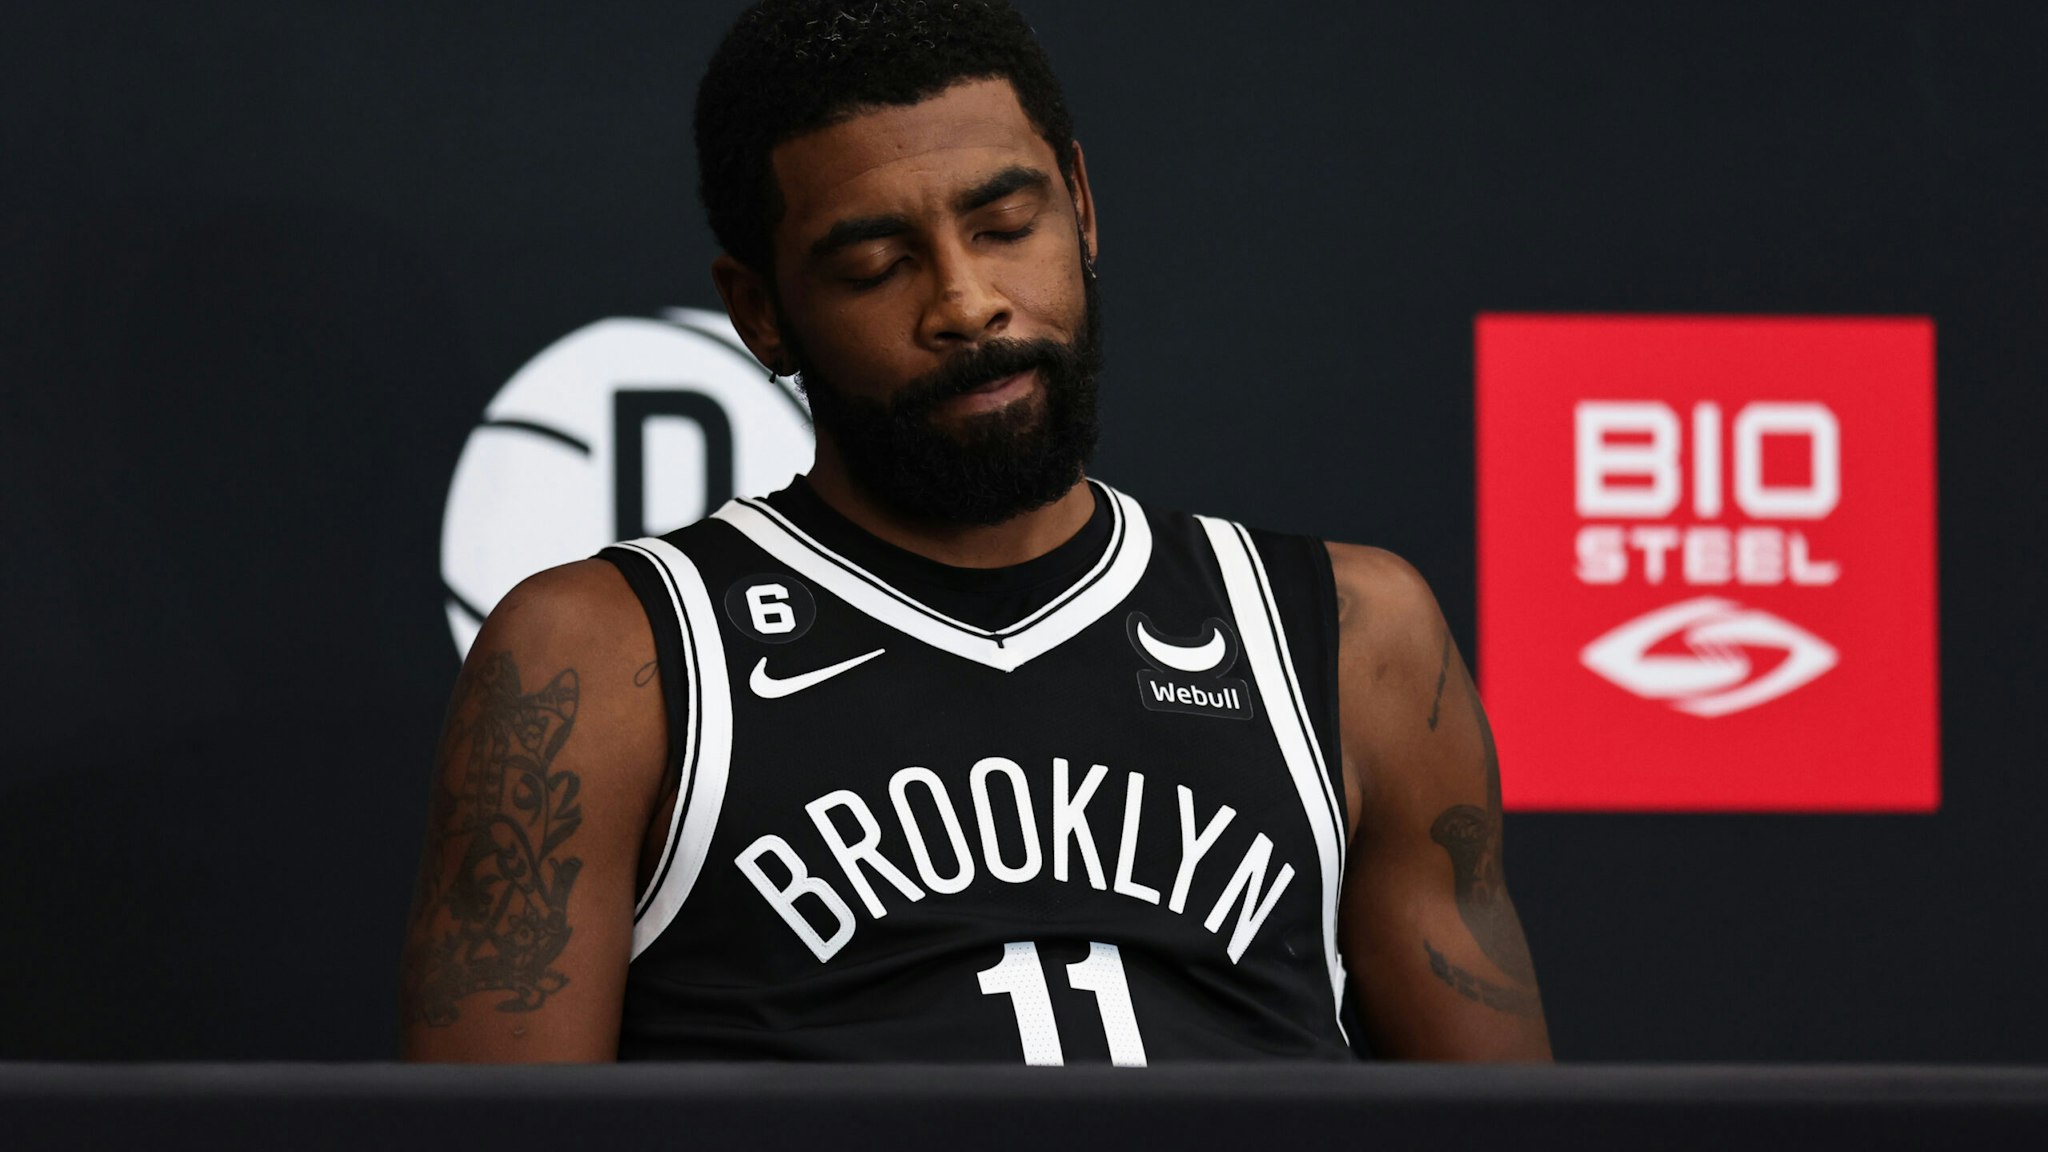 Kyrie Irving #11 of the Brooklyn Nets speaks during a press conference at Brooklyn Nets Media Day at HSS Training Center on September 26, 2022 in the Brooklyn borough of New York City. NOTE TO USER: User expressly acknowledges and agrees that, by downloading and/or using this photograph, User is consenting to the terms and conditions of the Getty Images License Agreement.